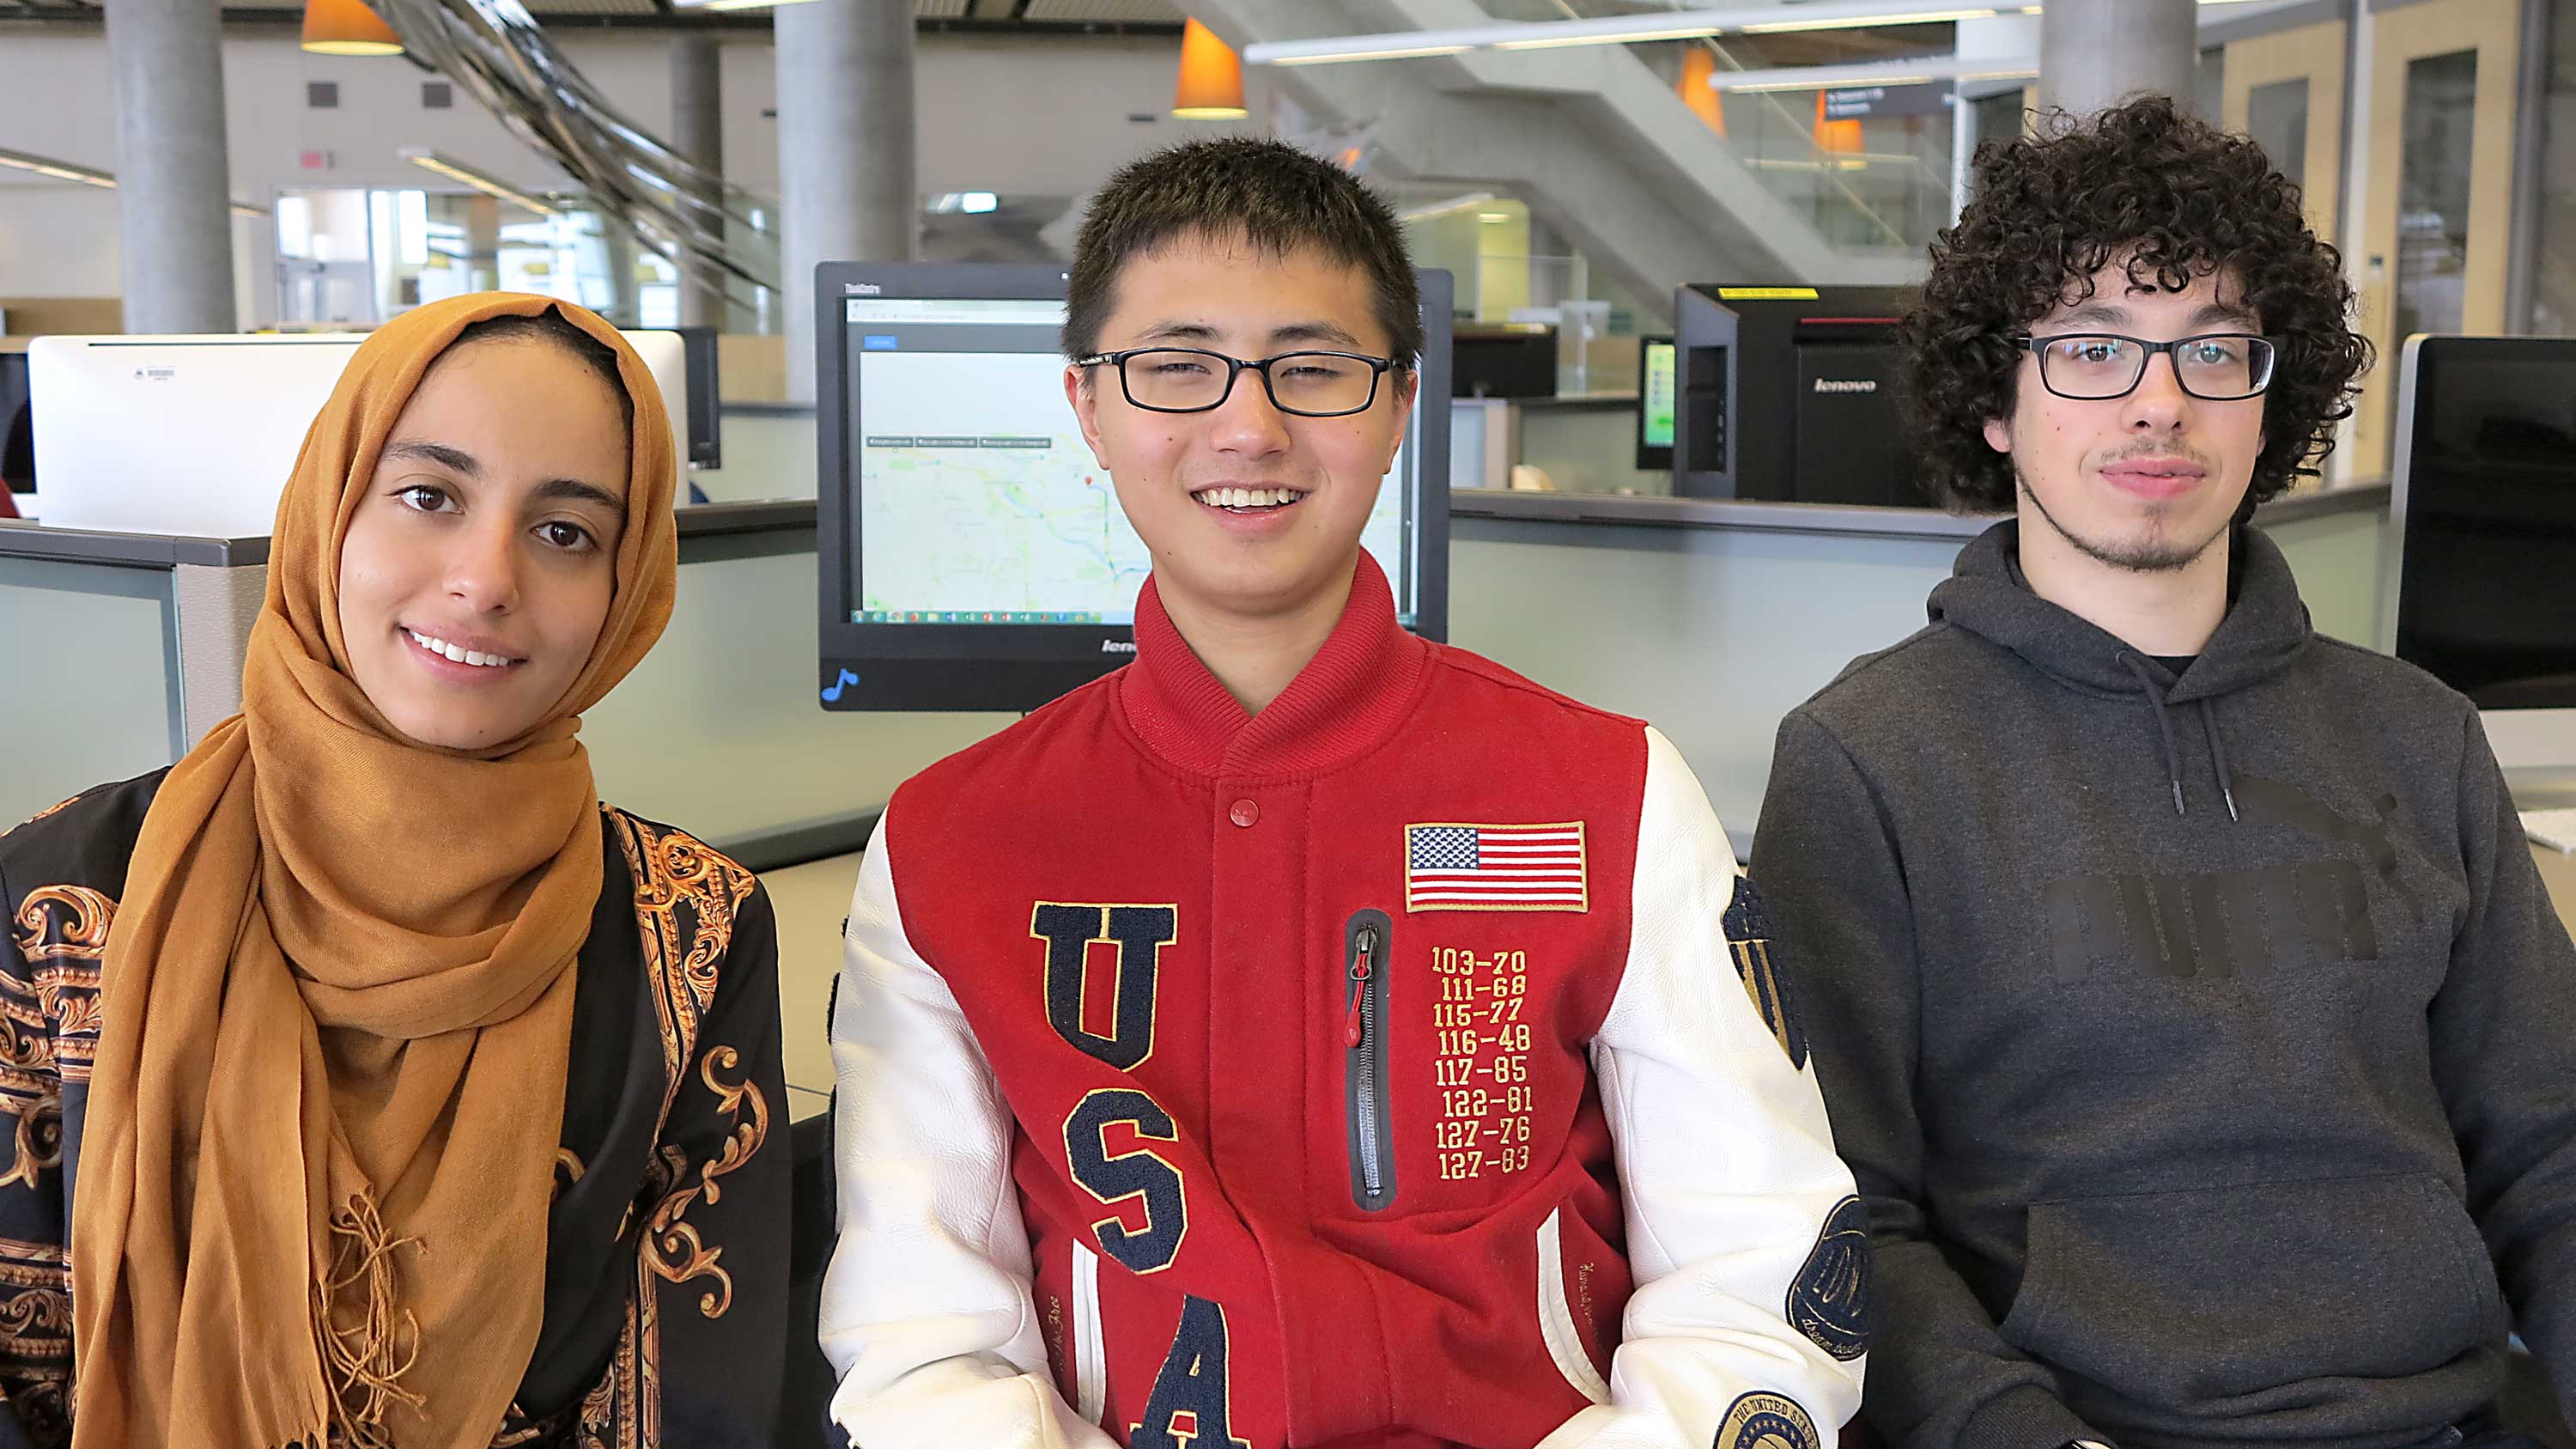 (From left) Fatima Bin Sumait, Peter Zung and Phil Nadon pose in a computer lab